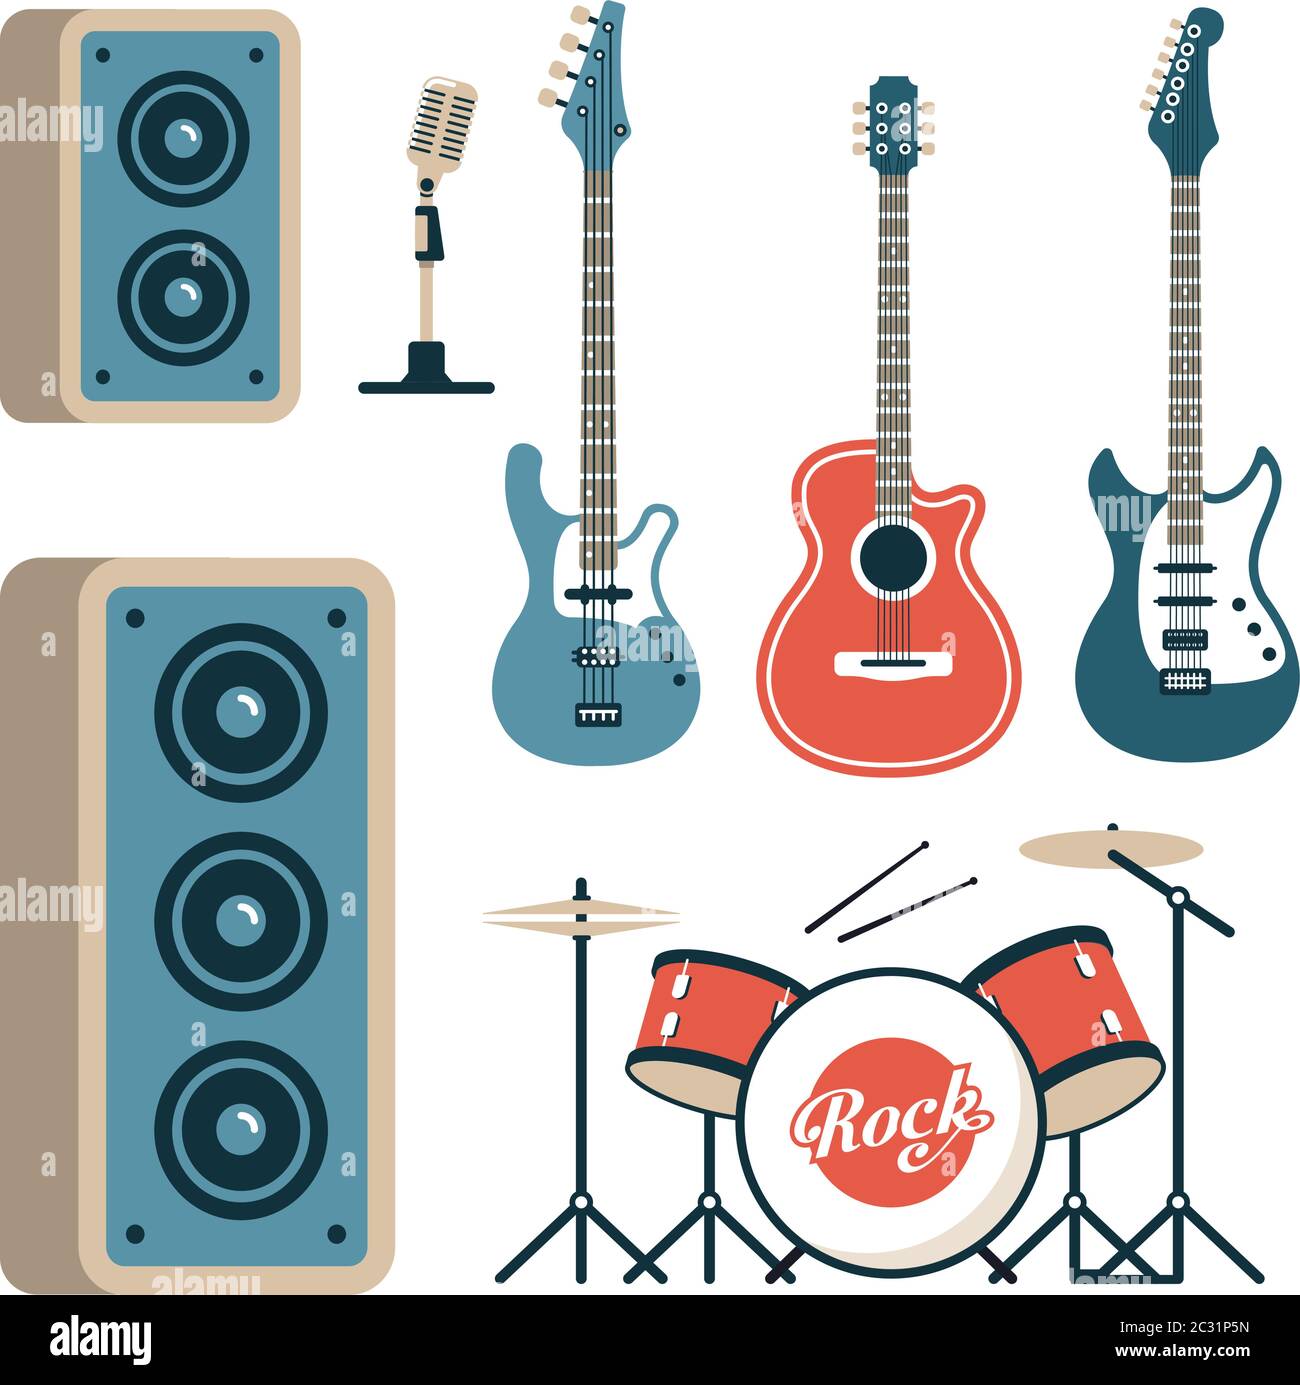 Musical instruments for rock band Stock Vector